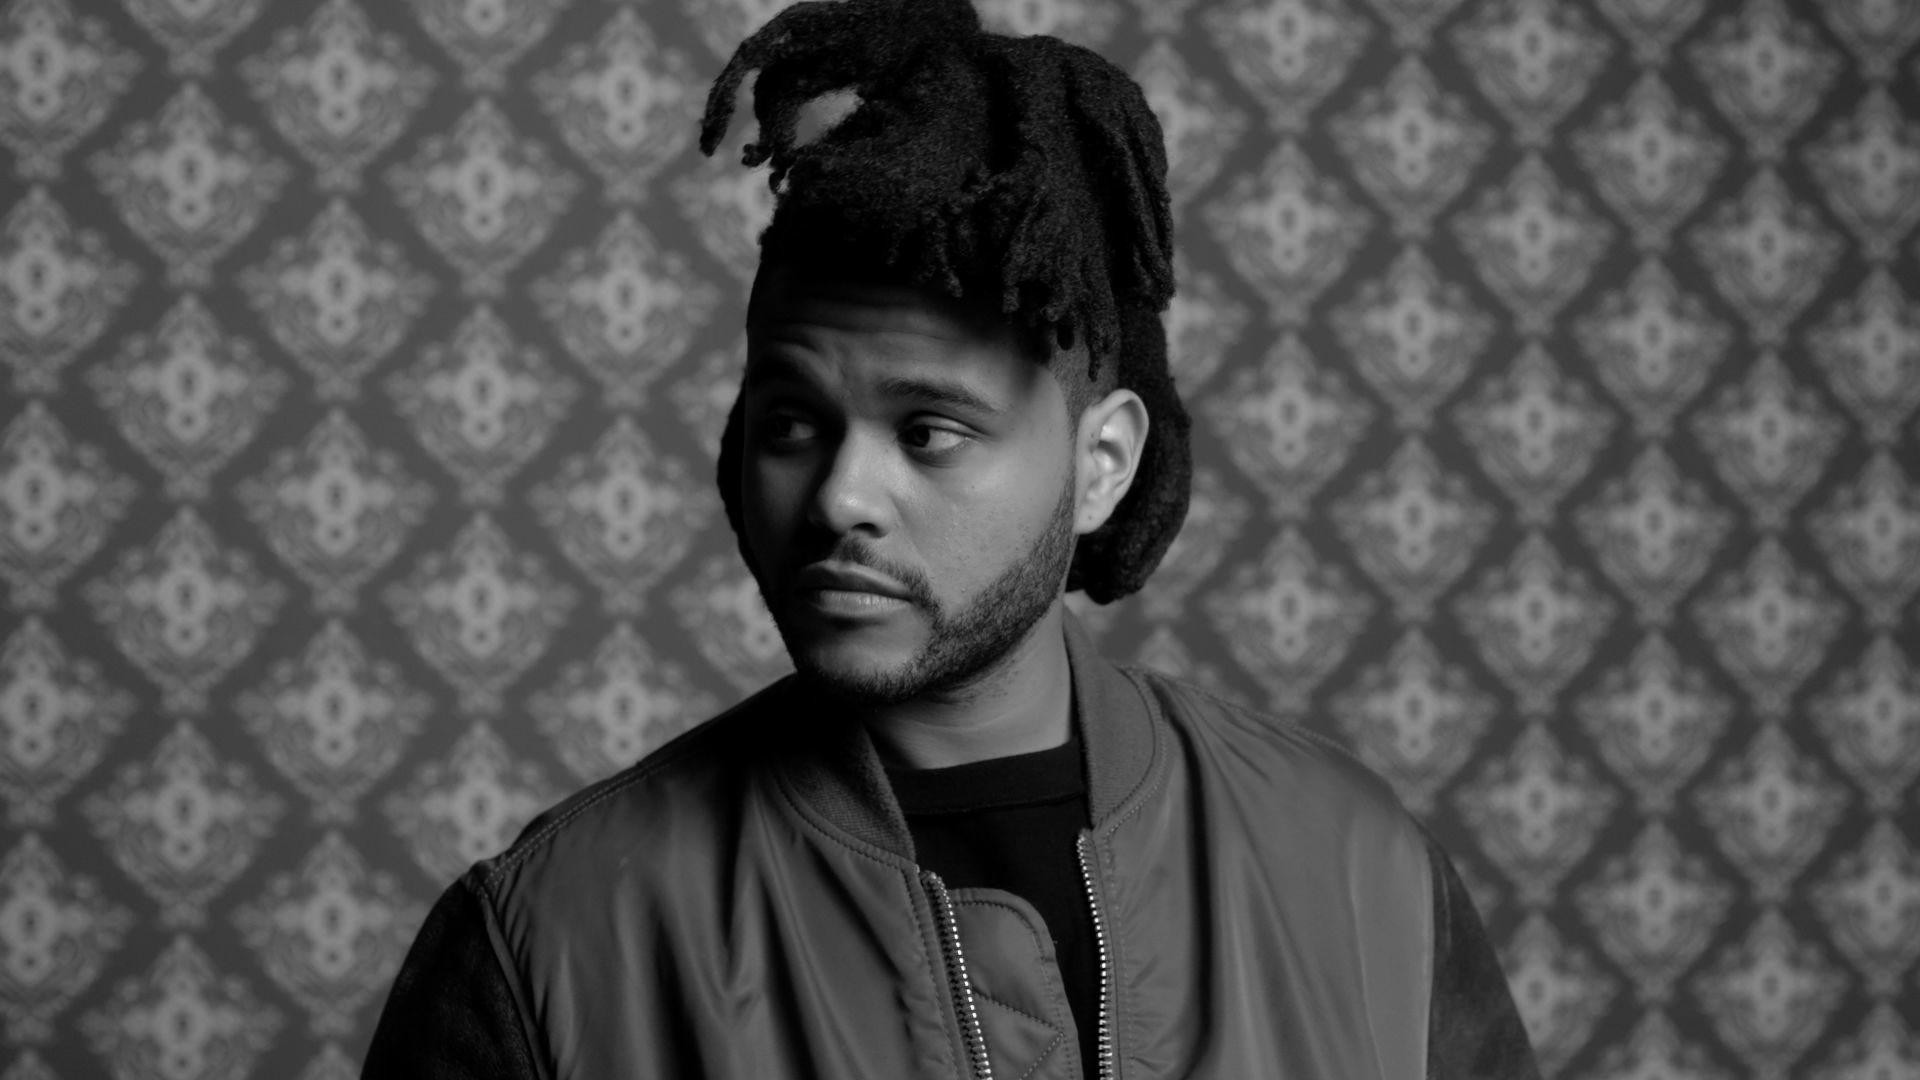 The Weeknd wallpaper ·① Download free stunning backgrounds ...